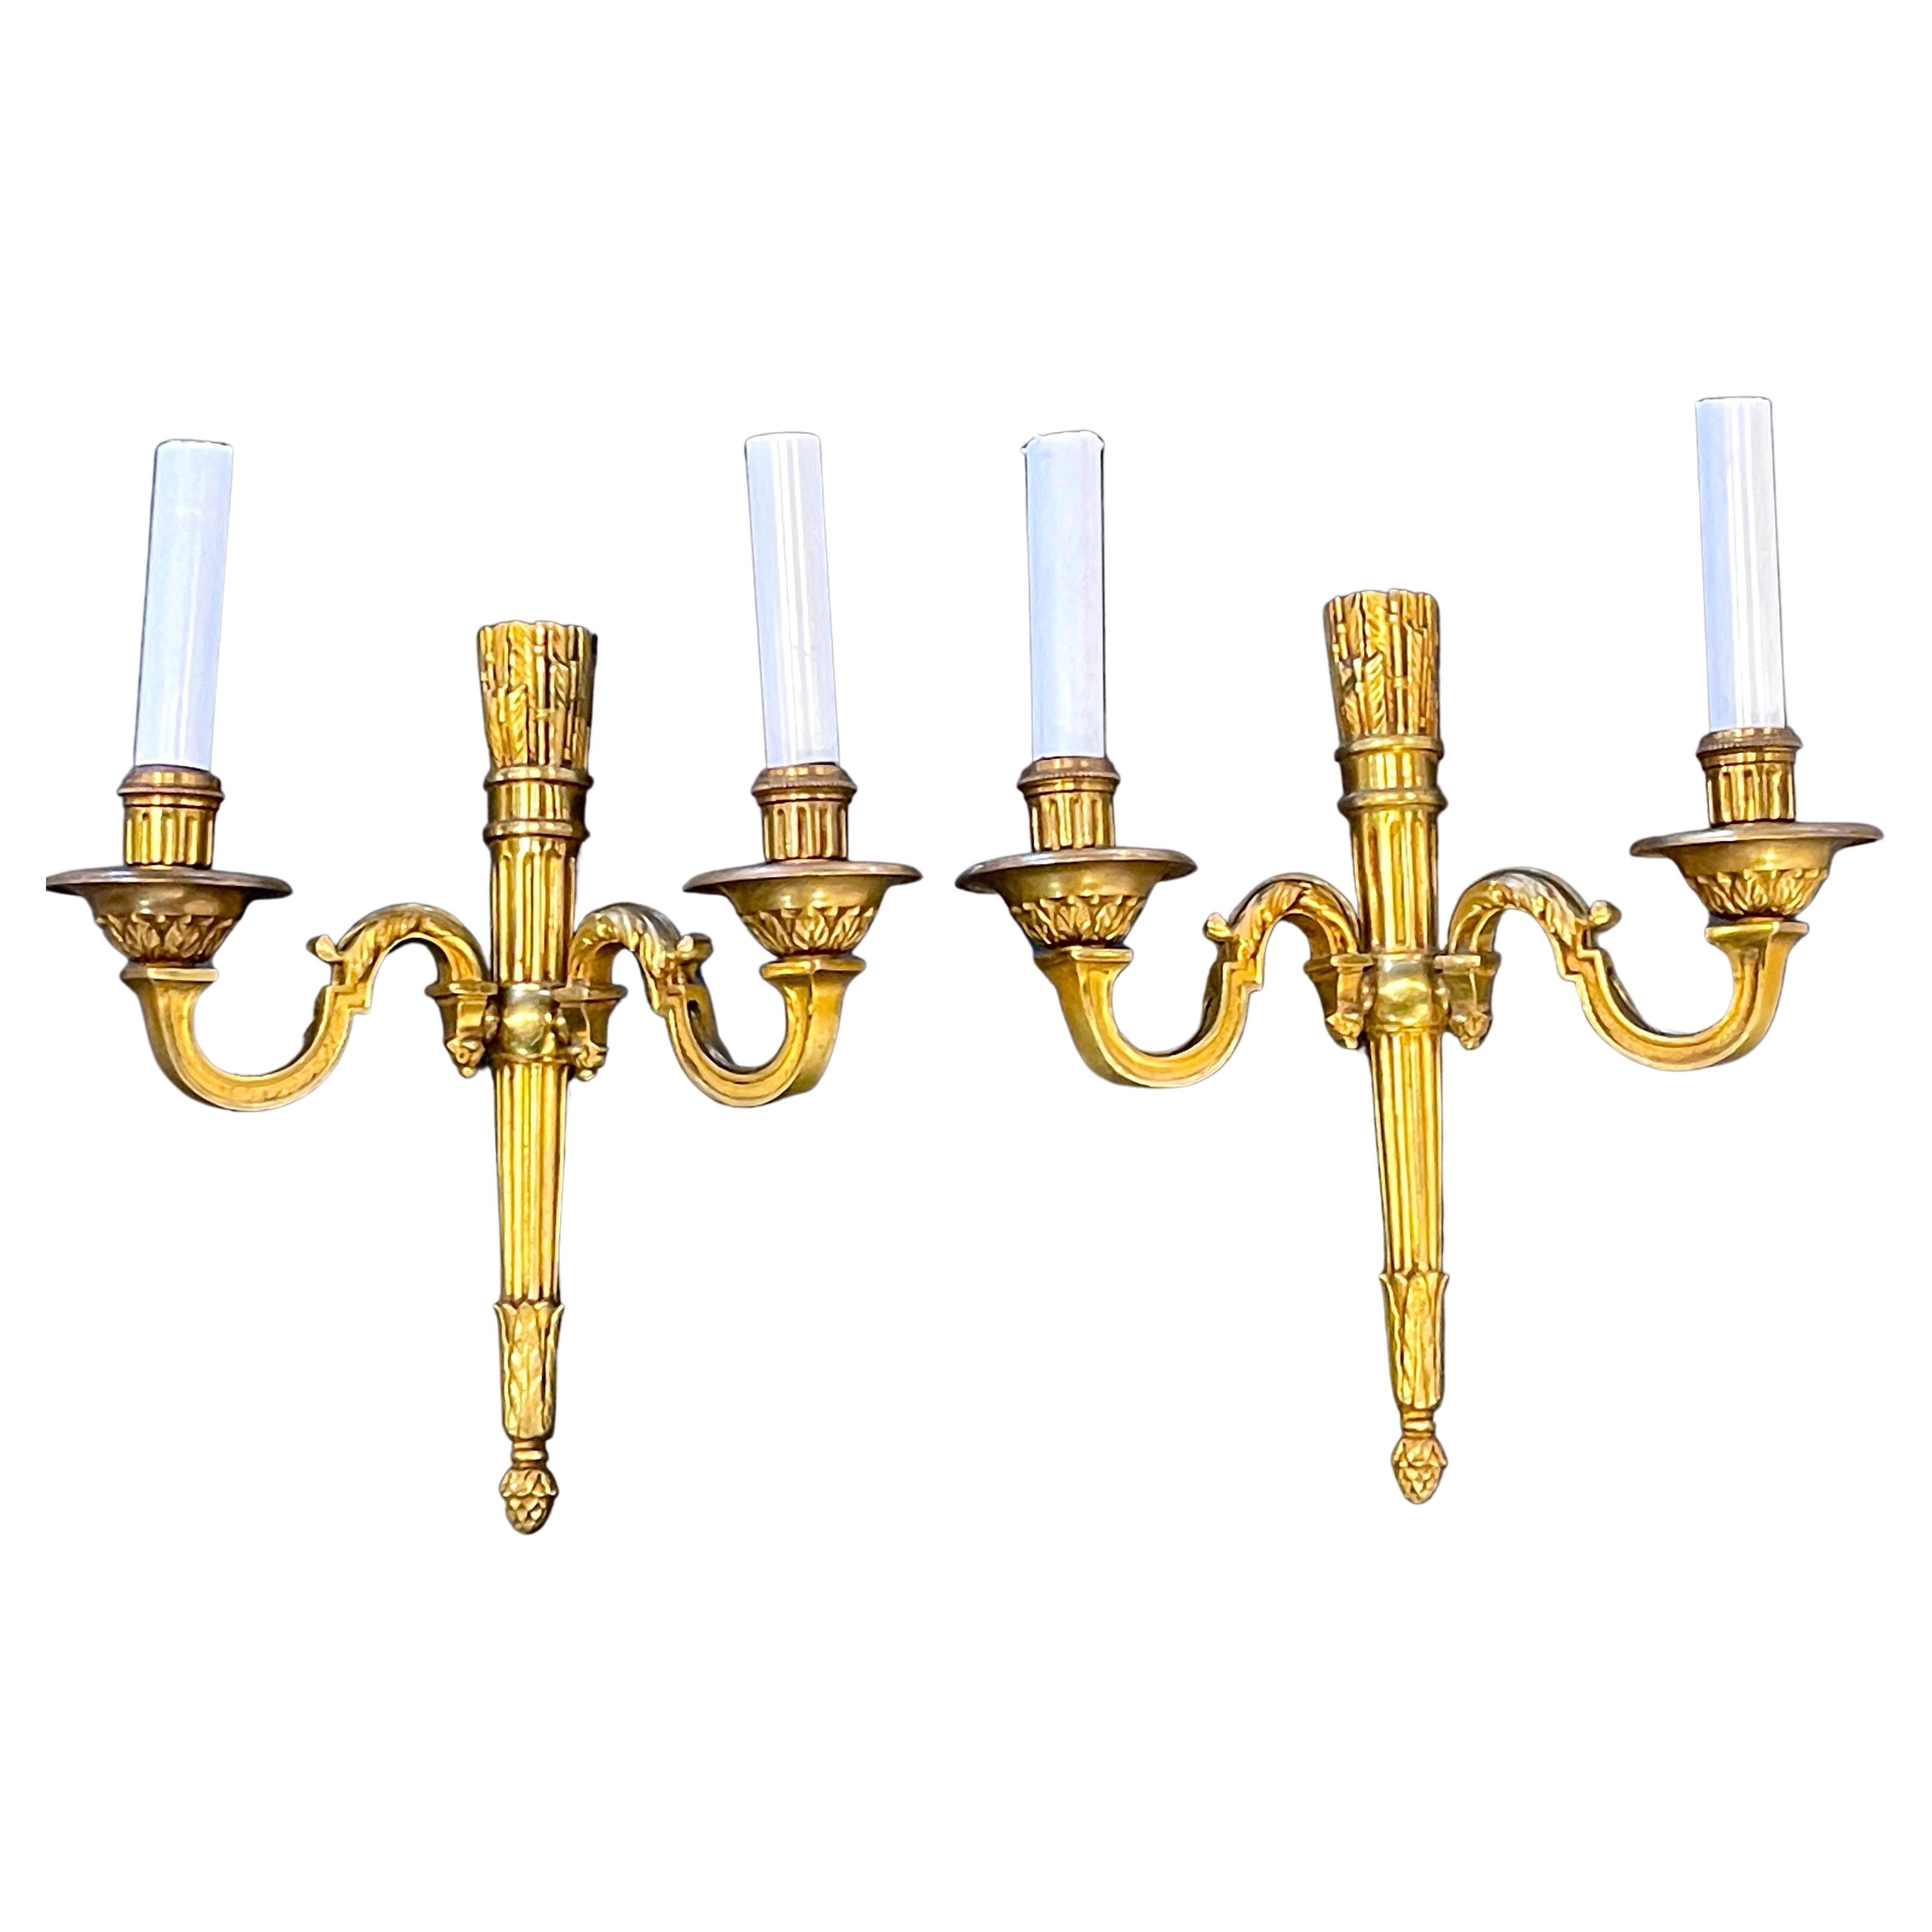 Pair of Late 19th Century French Ormolu Neoclassical, Regence Stye Sconces  For Sale